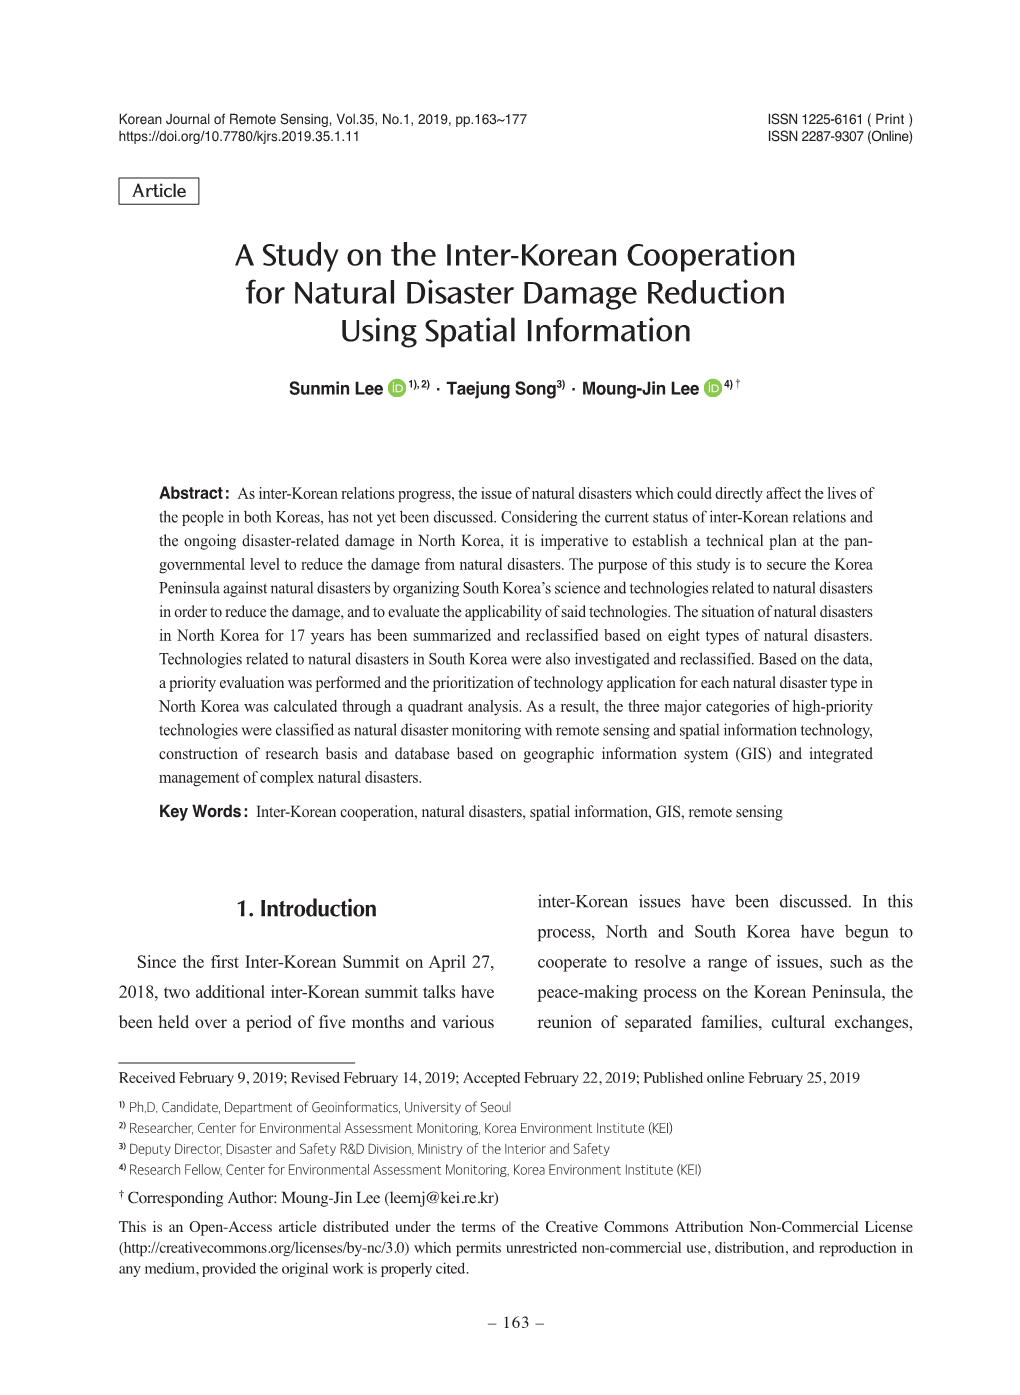 A Study on the Inter-Korean Cooperation for Natural Disaster Damage Reduction Using Spatial Information